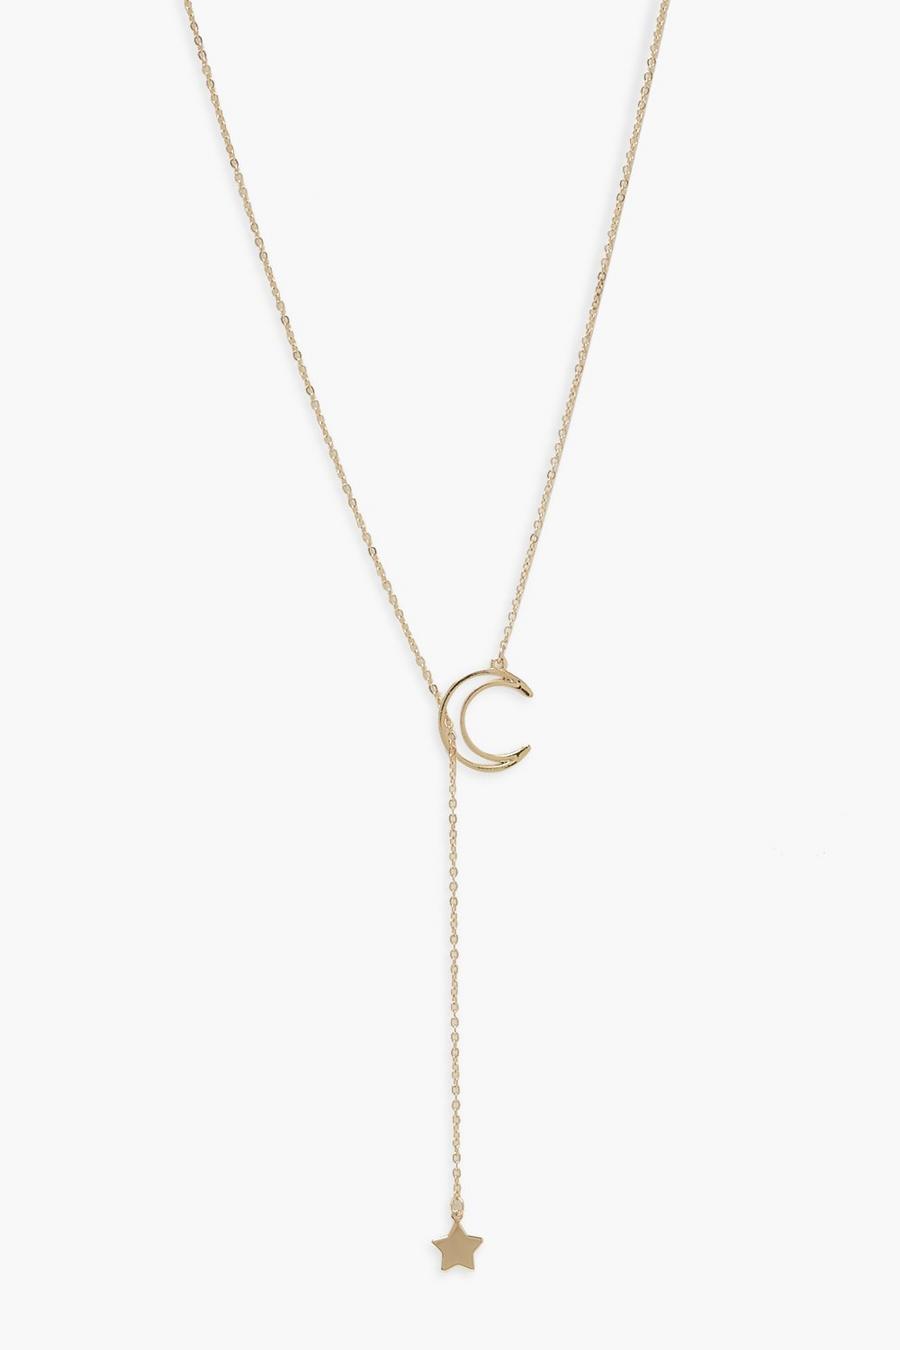 Gold metallic Moon And Star Adjustable Necklace